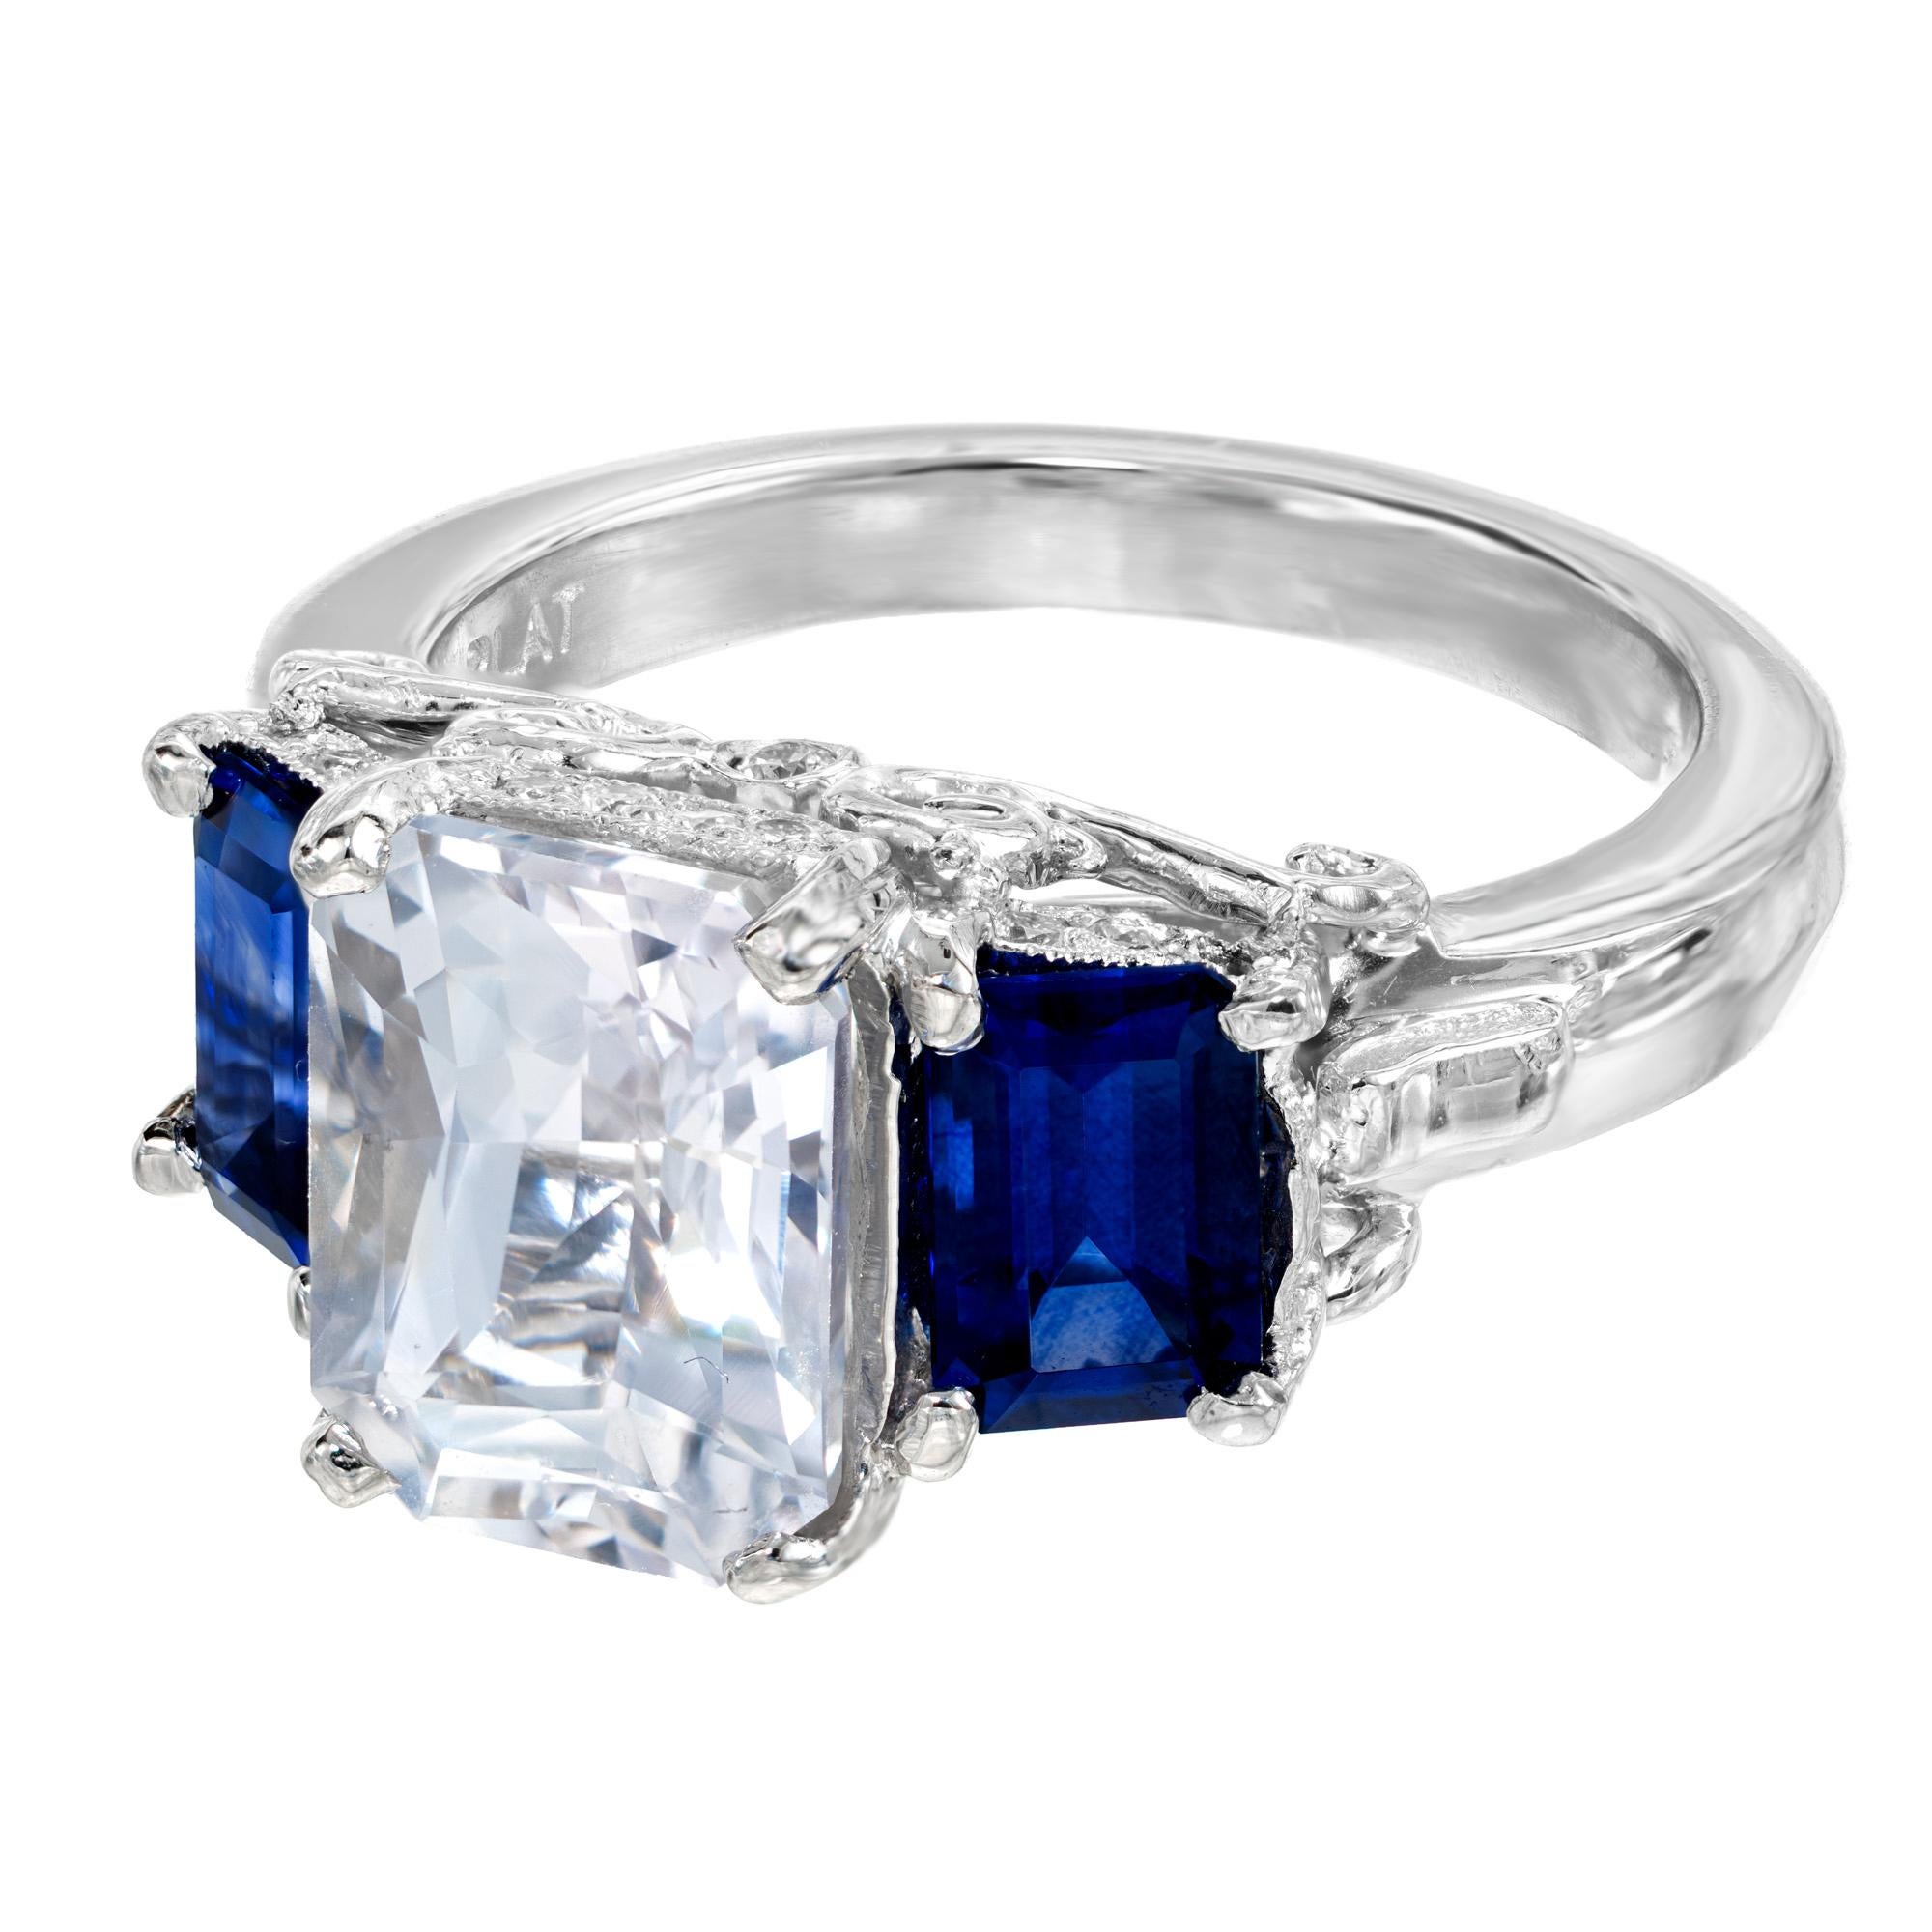 Three stone sapphire diamond engagement ring. This beautiful setting came to us with gemstones we did not feel showcased the beauty of the setting. The 1920's center stone was replaced with a unique light pink 3.57ct octagonal sapphire with a raised